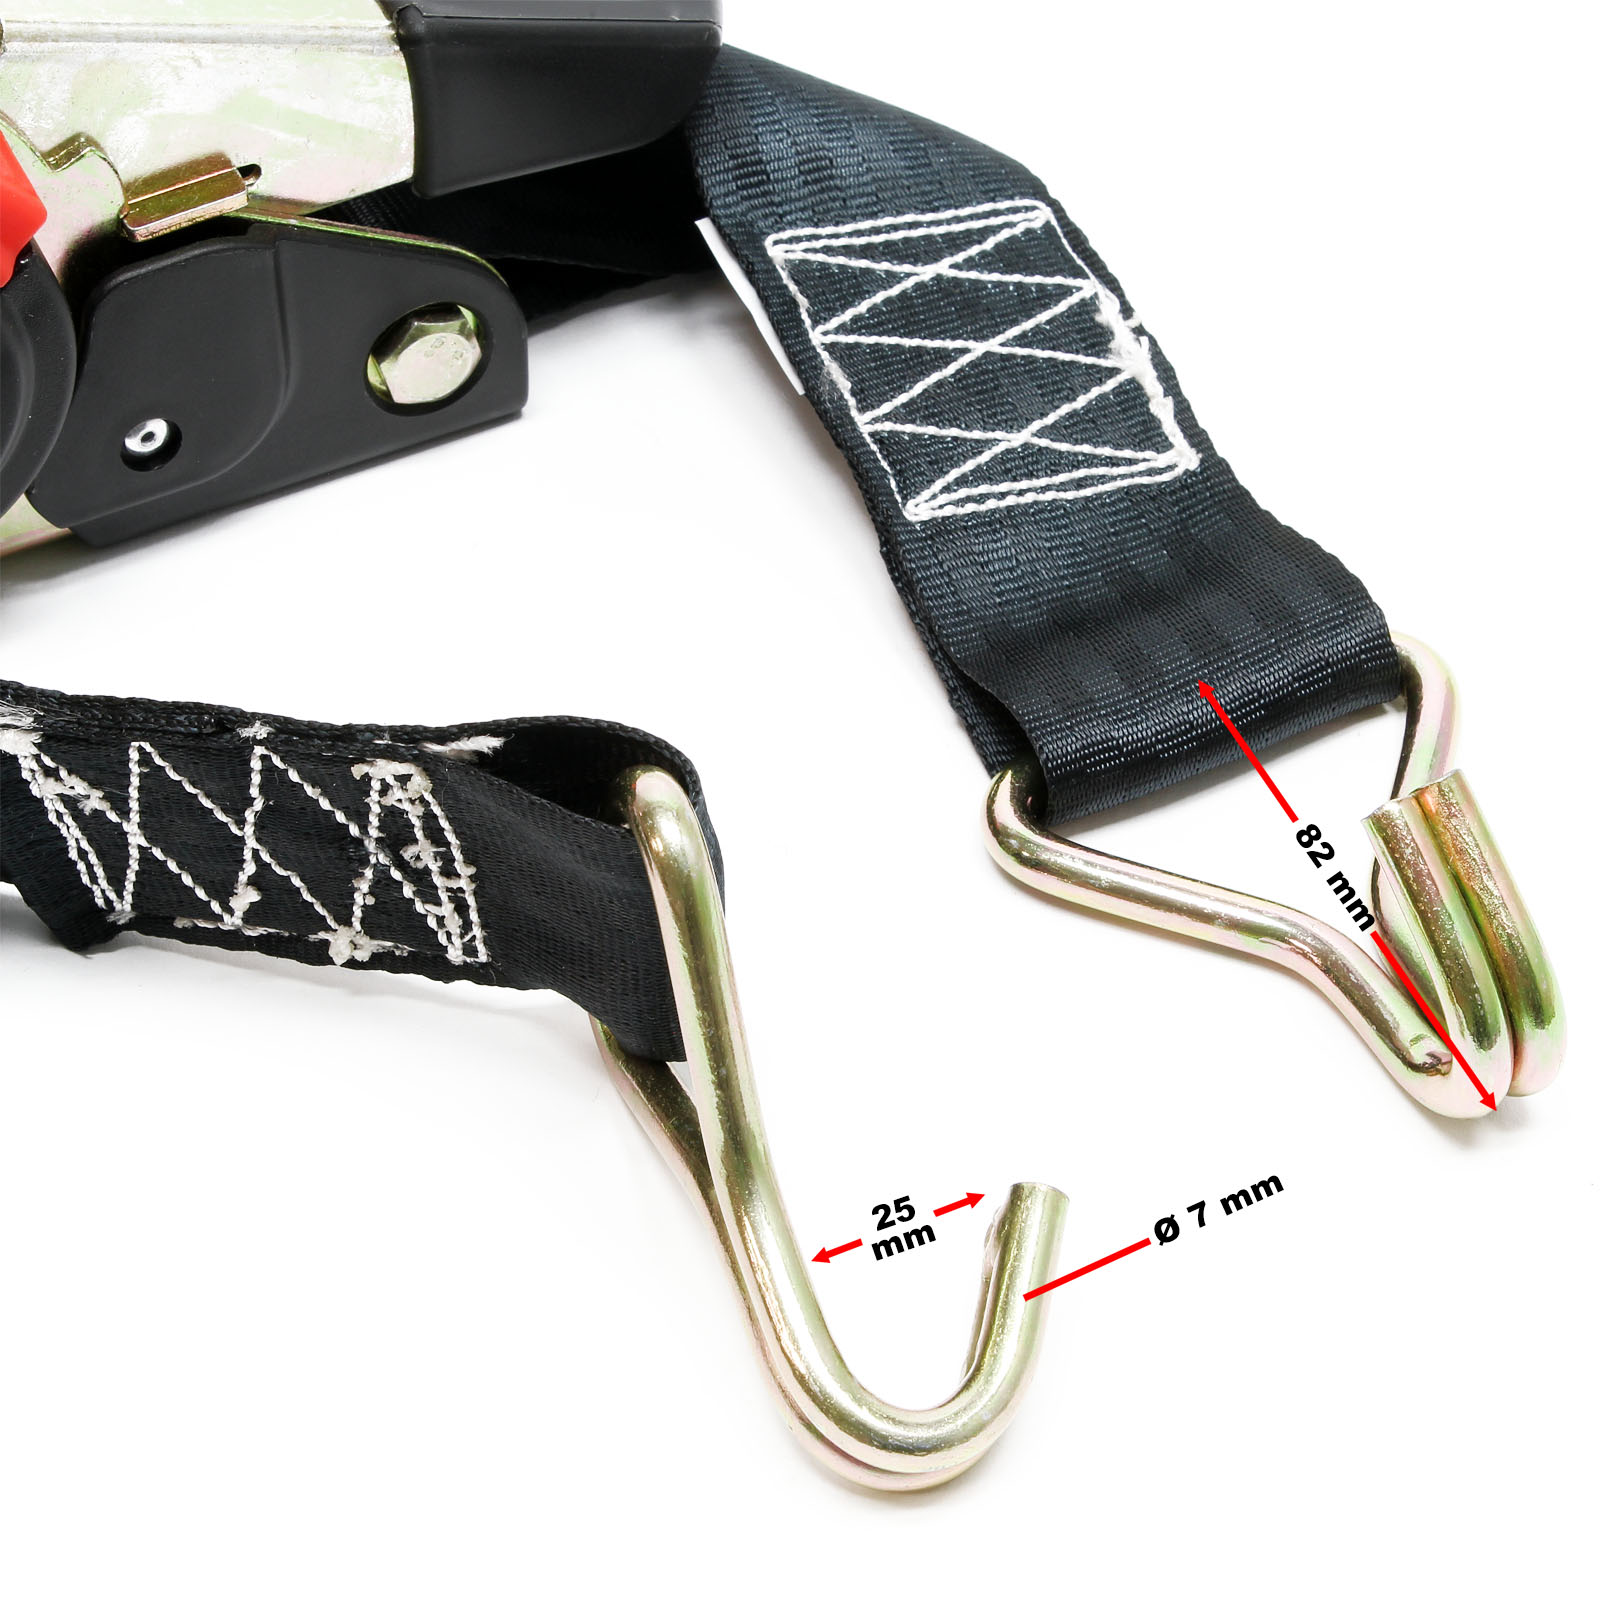 WilTec Ratchet Tie Down Strap Set 4x PES Tension Belt 3m x 25mm with Auto Retract and 320 daN 